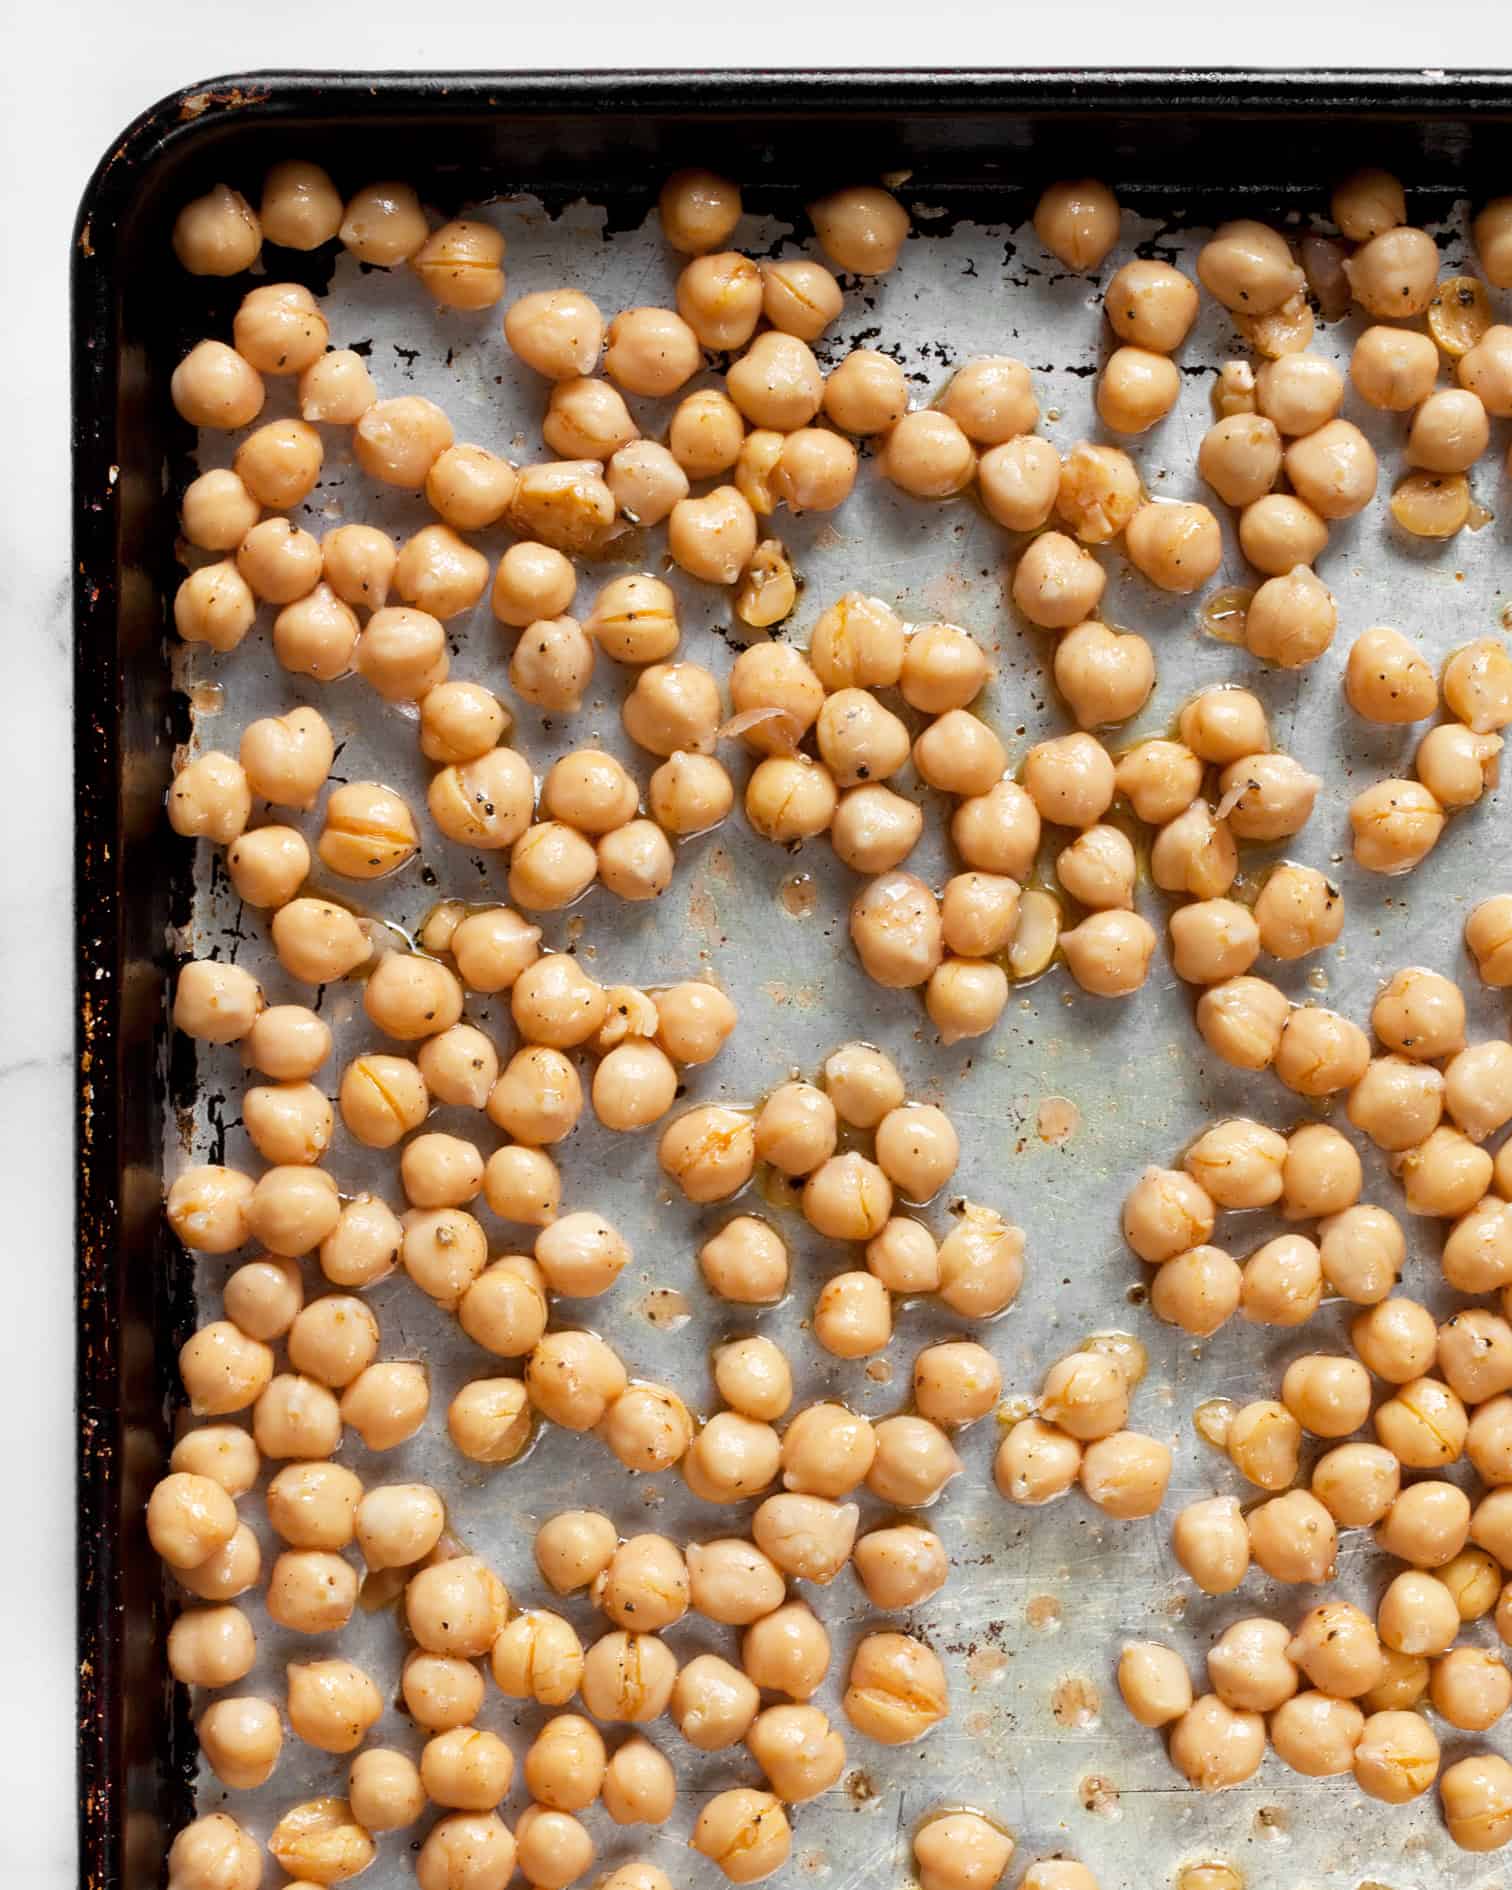 Marinated chickpeas on a sheet pan